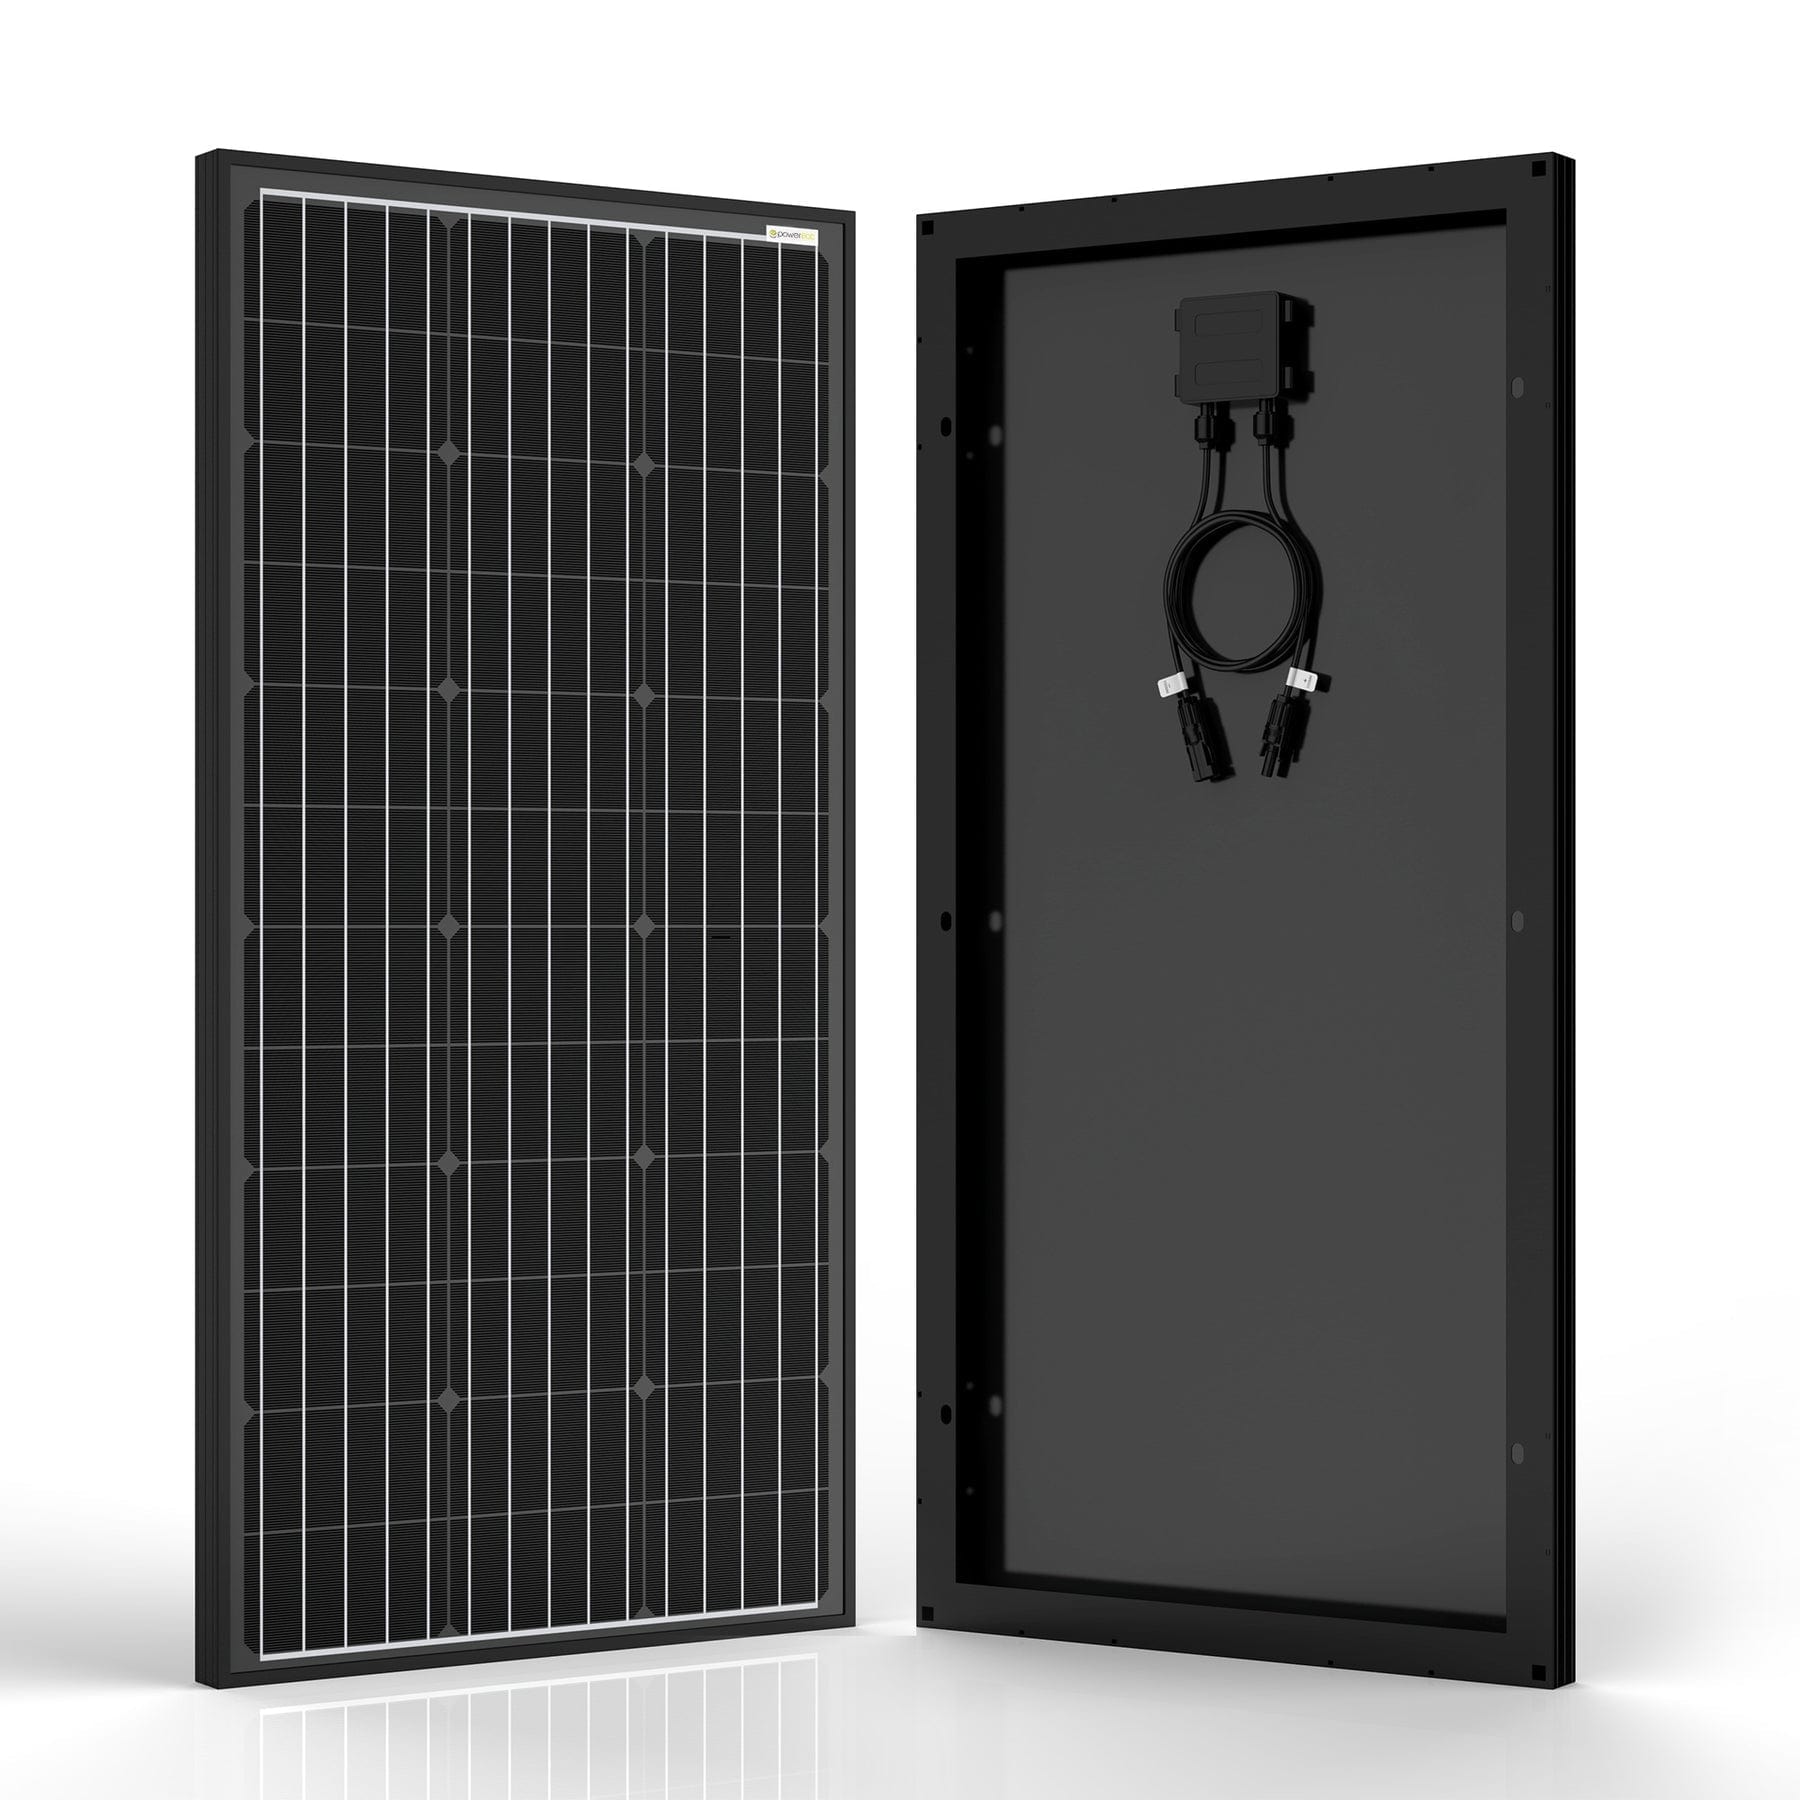 ACOPOWER 200W 12V Monocrystalline Solar Panel for Water Pumps HY200-12MB